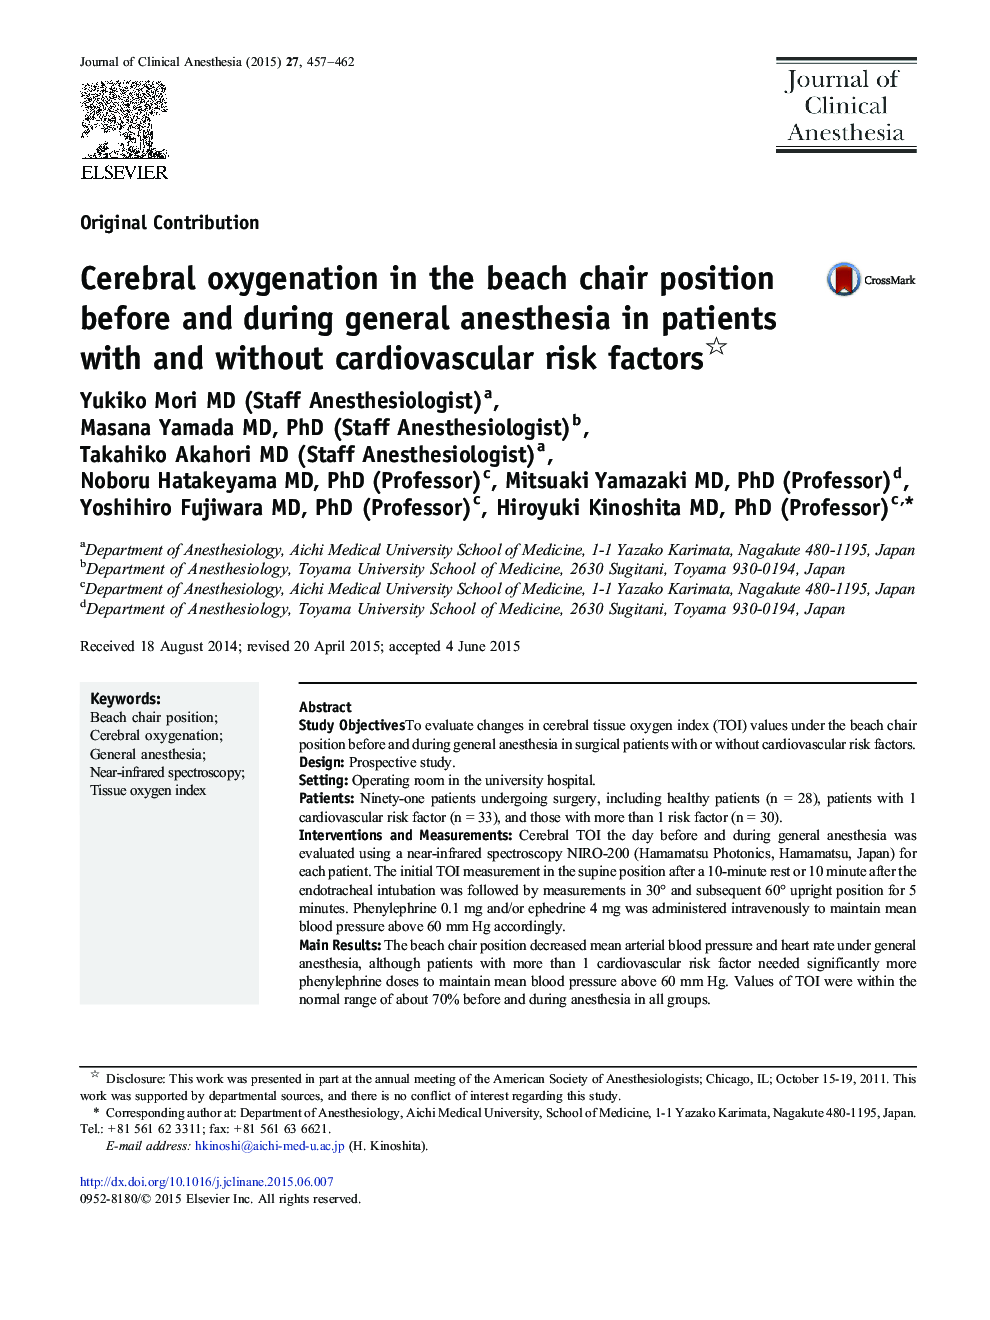 Cerebral oxygenation in the beach chair position before and during general anesthesia in patients with and without cardiovascular risk factors 